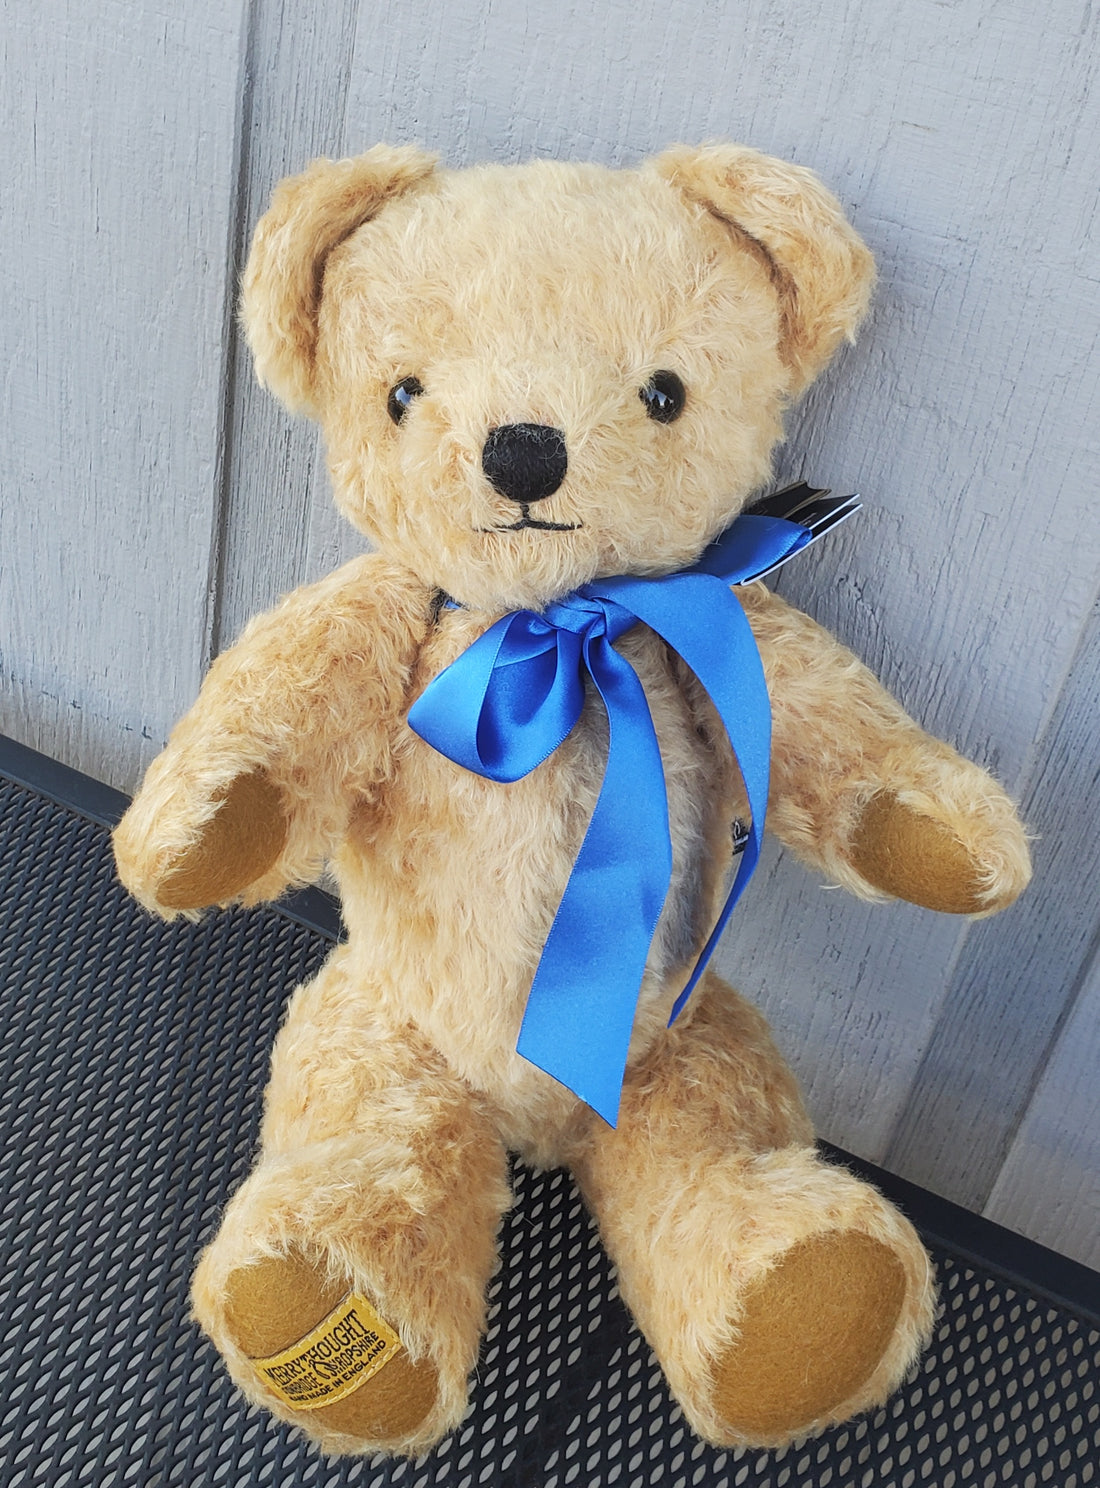 London Gold Curly - 16" Musical Mohair Teddy Bear by Merrythought